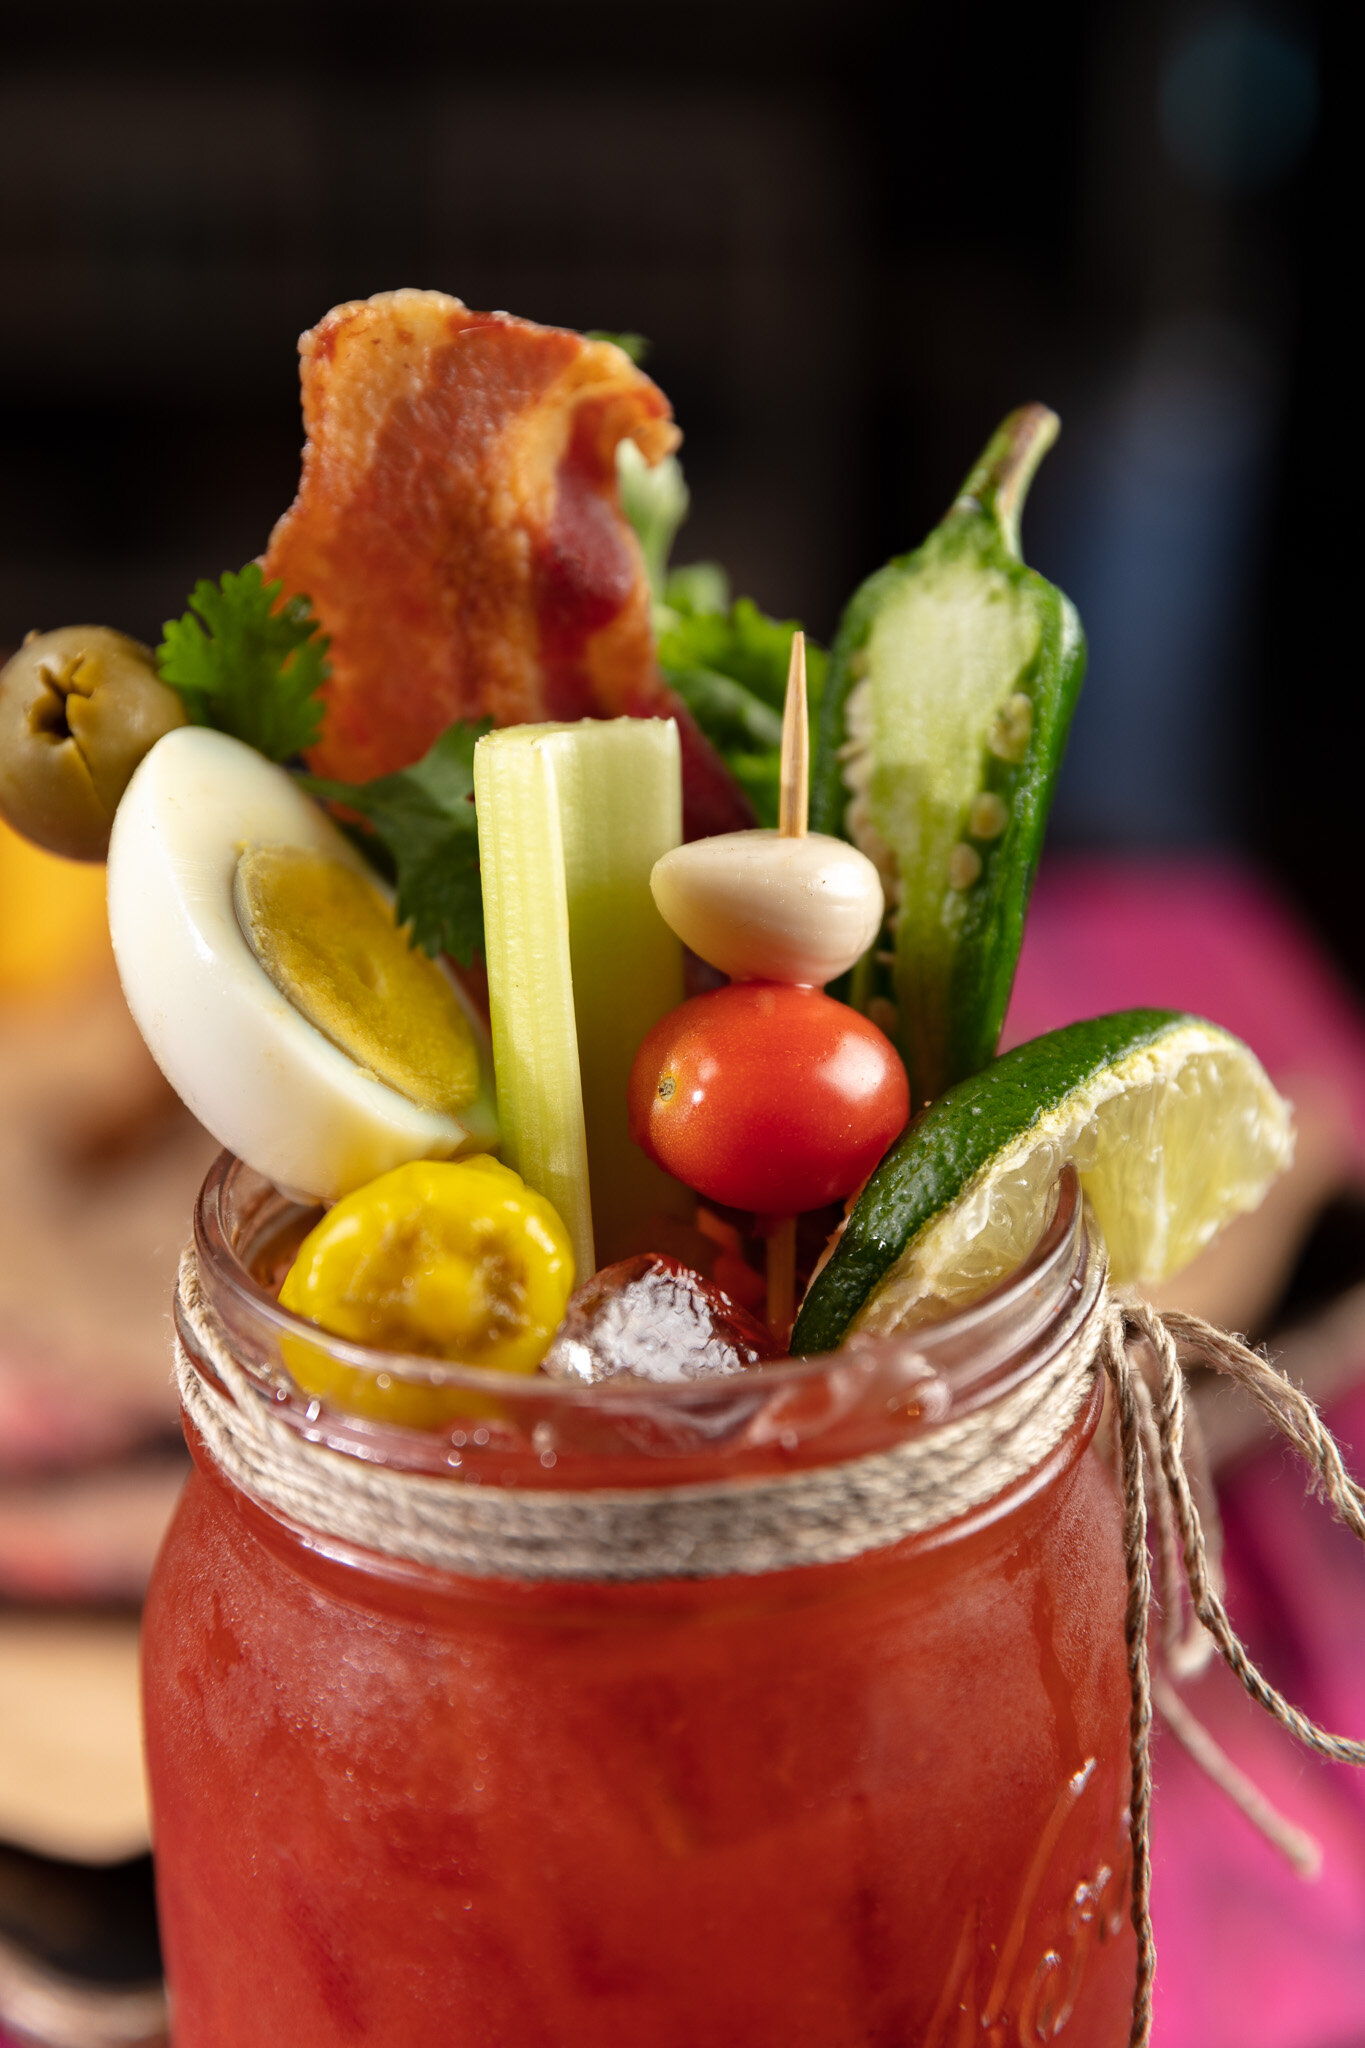  Beverage Photography | Bloody Mary 